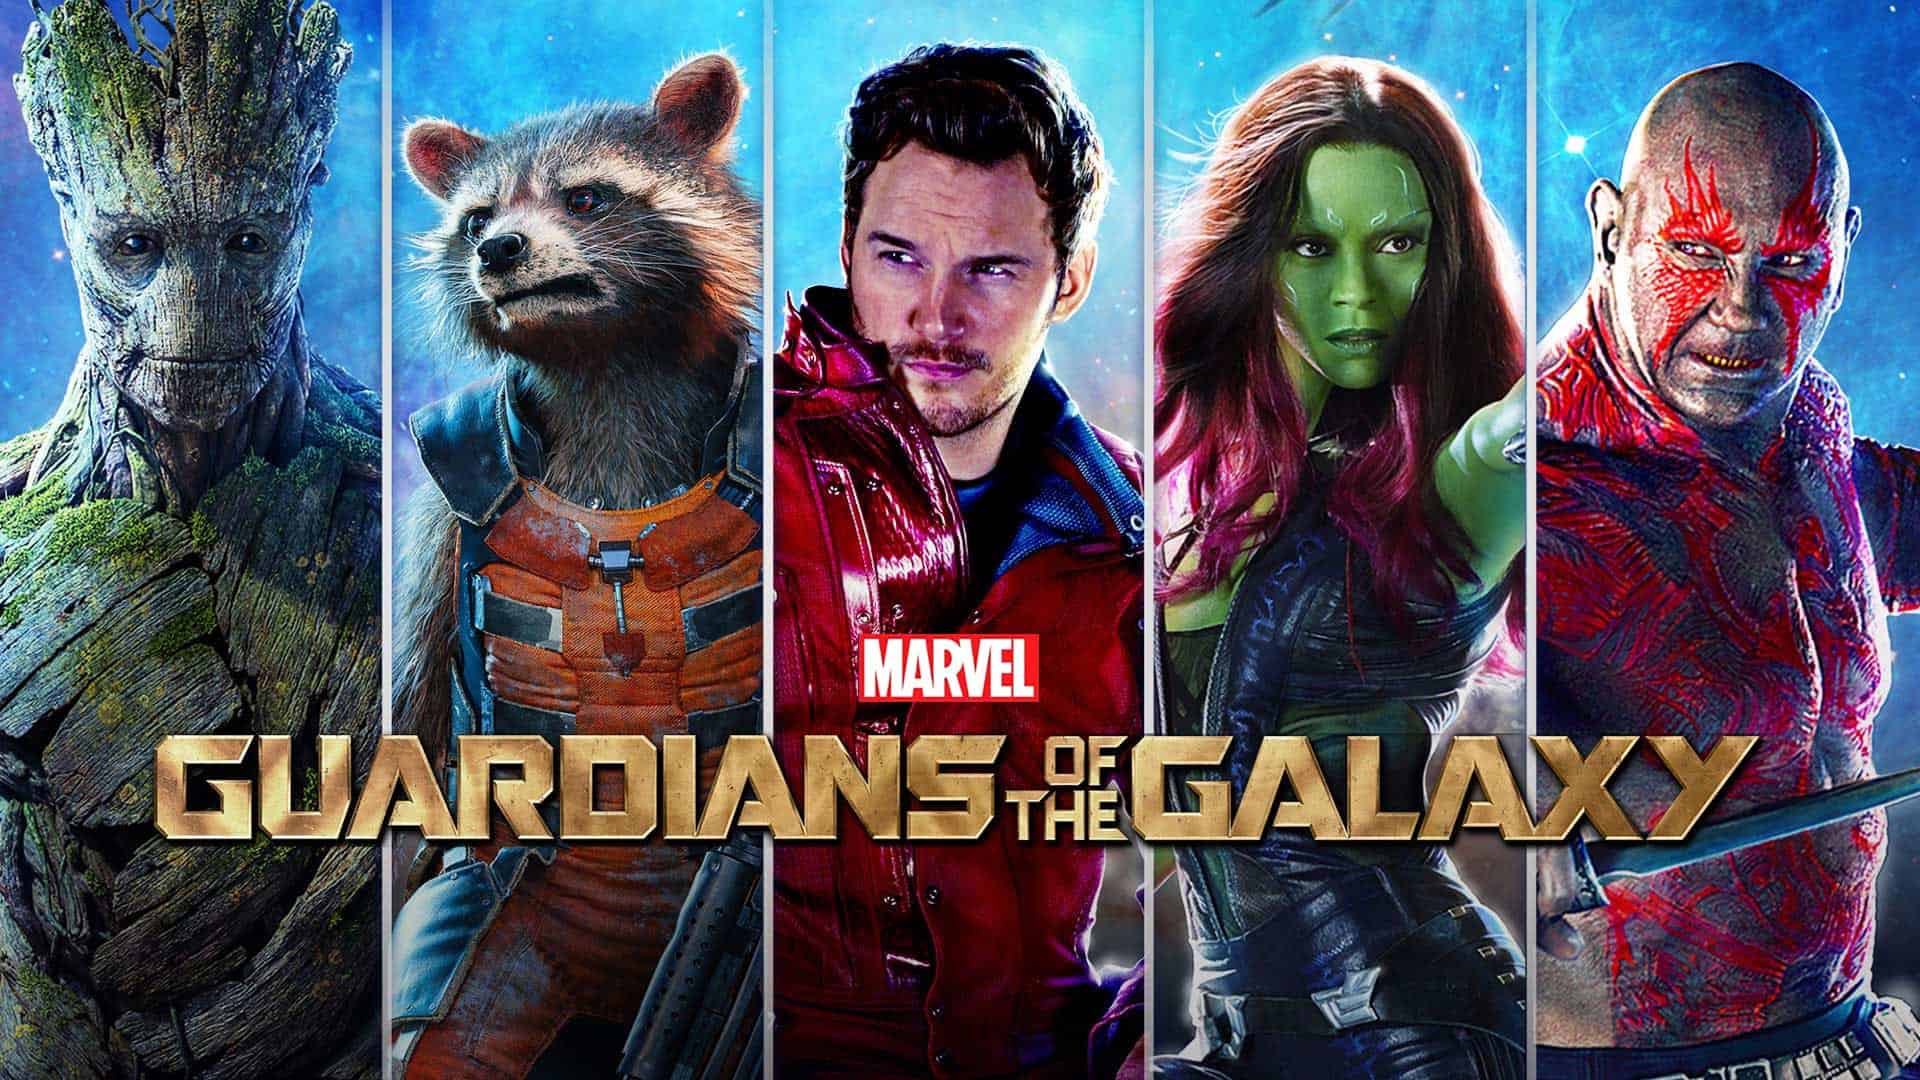 1655bfa0e43b2c2ac2d5e47880c1fc4bb86d2e02bbb648df31784ceb50820799 Guardians Of The Galaxy Vol. 3: Incredible Mid-Credit and Post-Credit Scenes (April 15) 